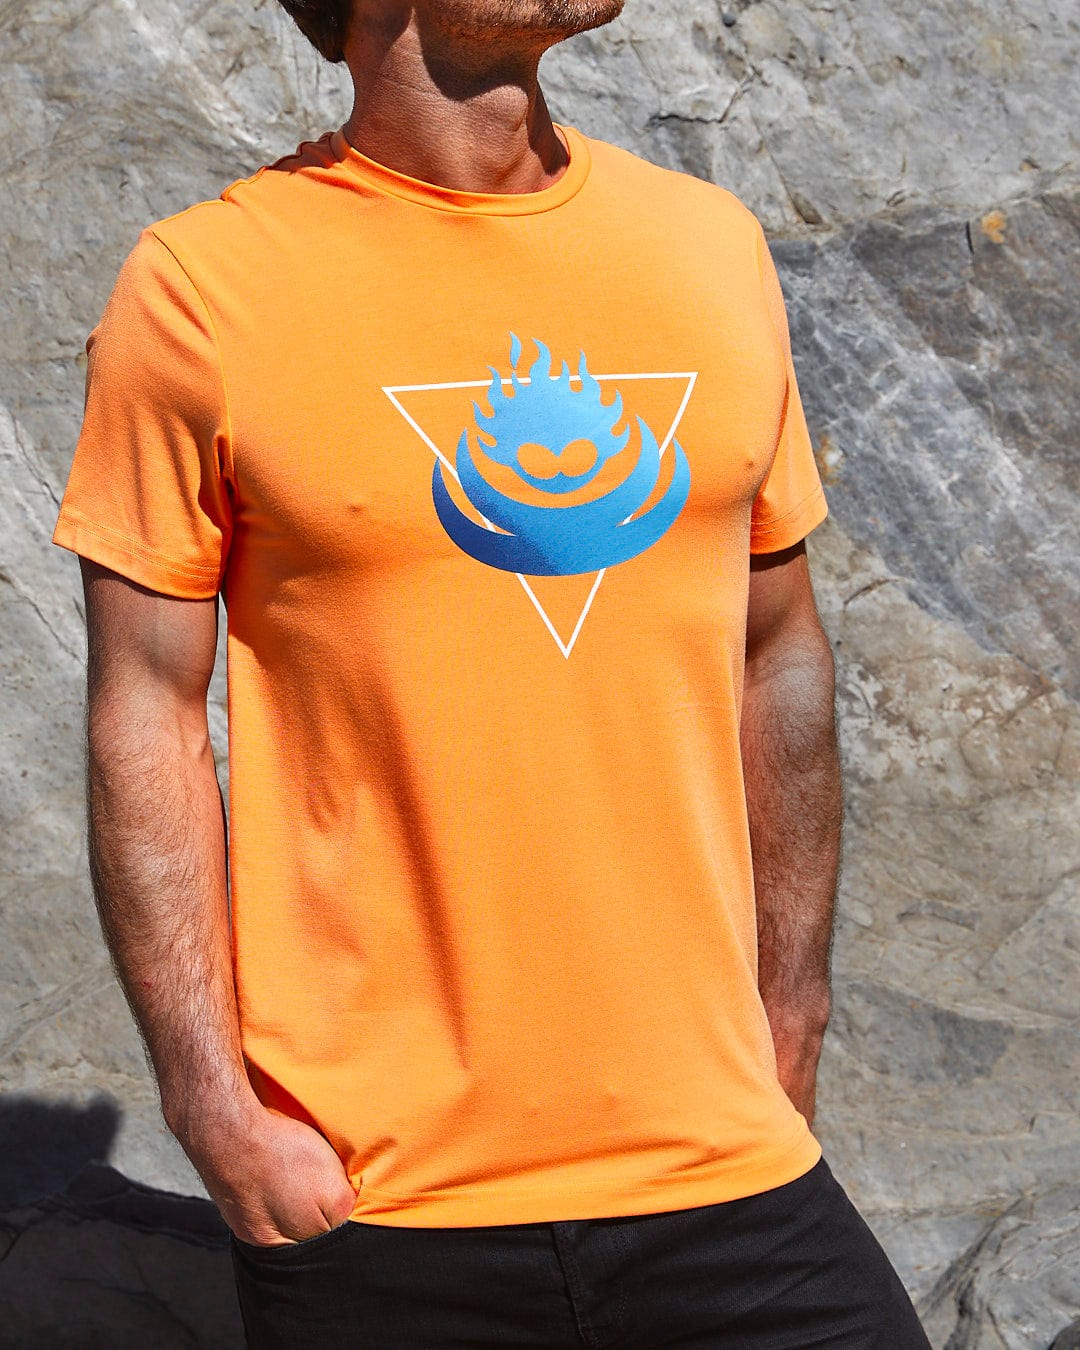 A man wearing a Saltrock Flame Tri - Mens Recycled Short Sleeve T-Shirt - Light Orange with a blue triangle on it.